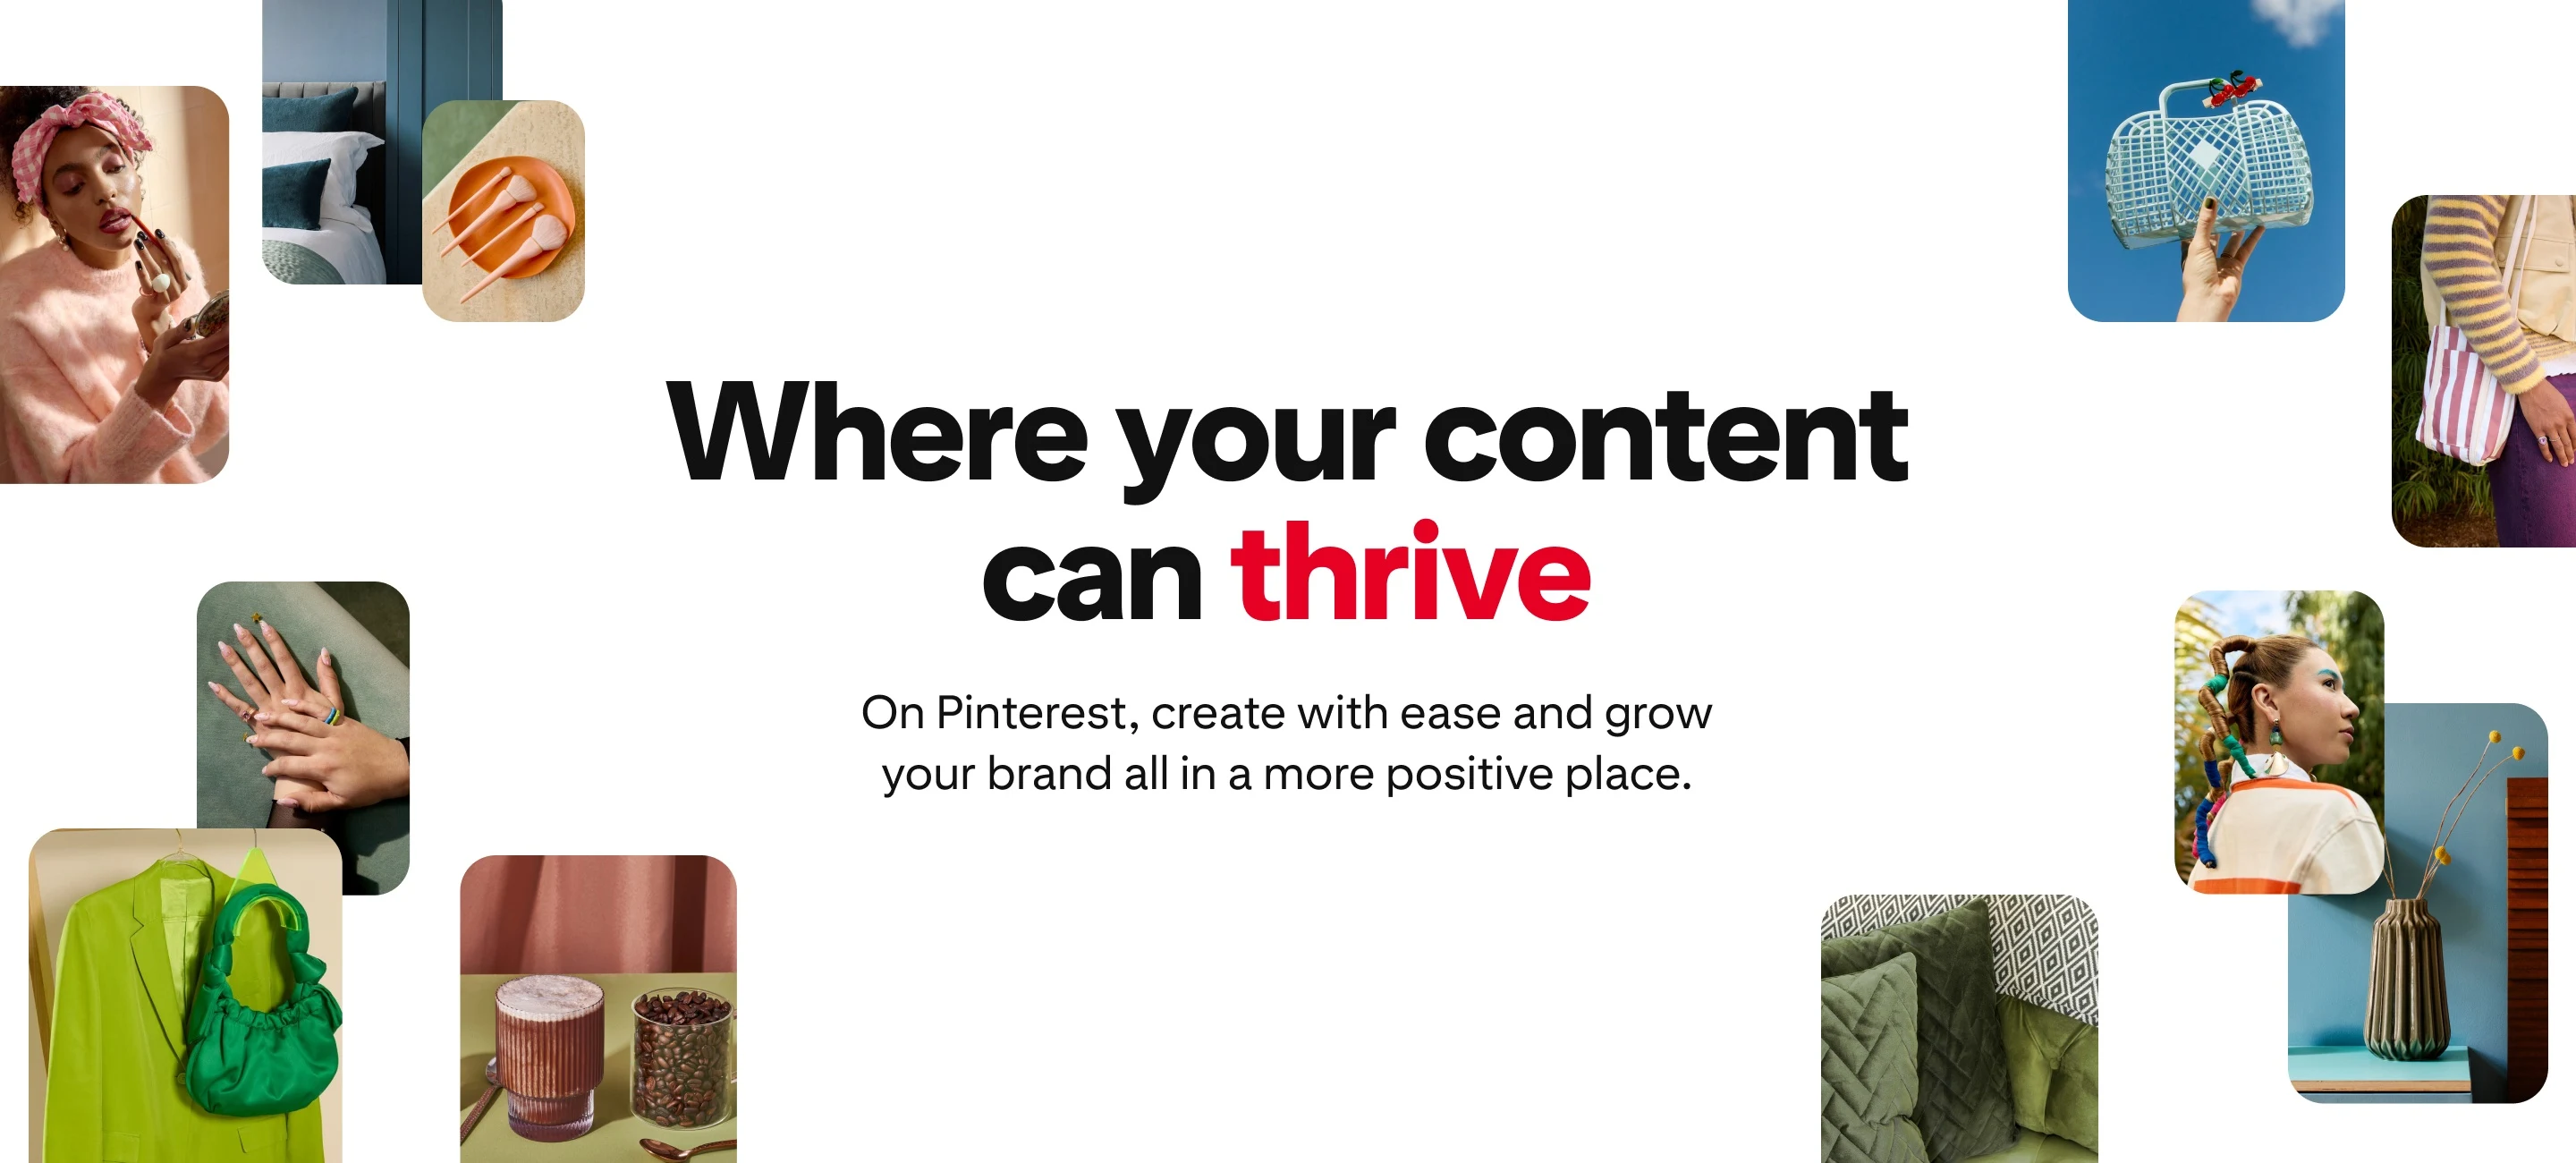 Collage images on a white background with headline text "Where your content can thrive" and sub copy "On Pinterest, create with ease and grow your brand all in a more positive place."